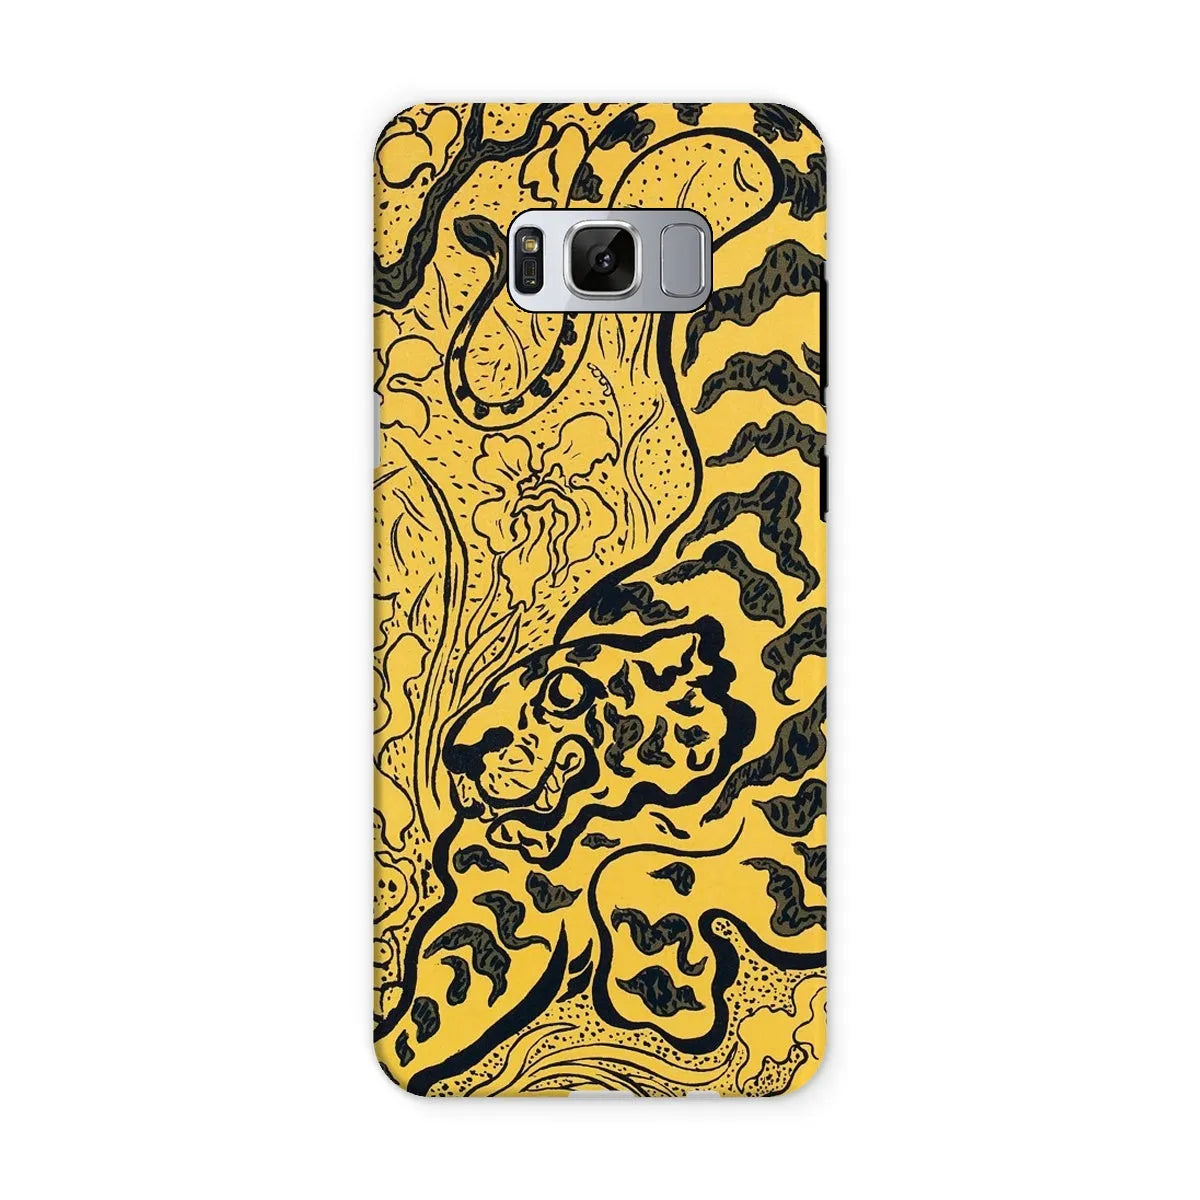 Tiger In The Jungle - Graphic Art Phone Case - Paul Ranson - Samsung Galaxy S8 / Matte - Mobile Phone Cases - Aesthetic